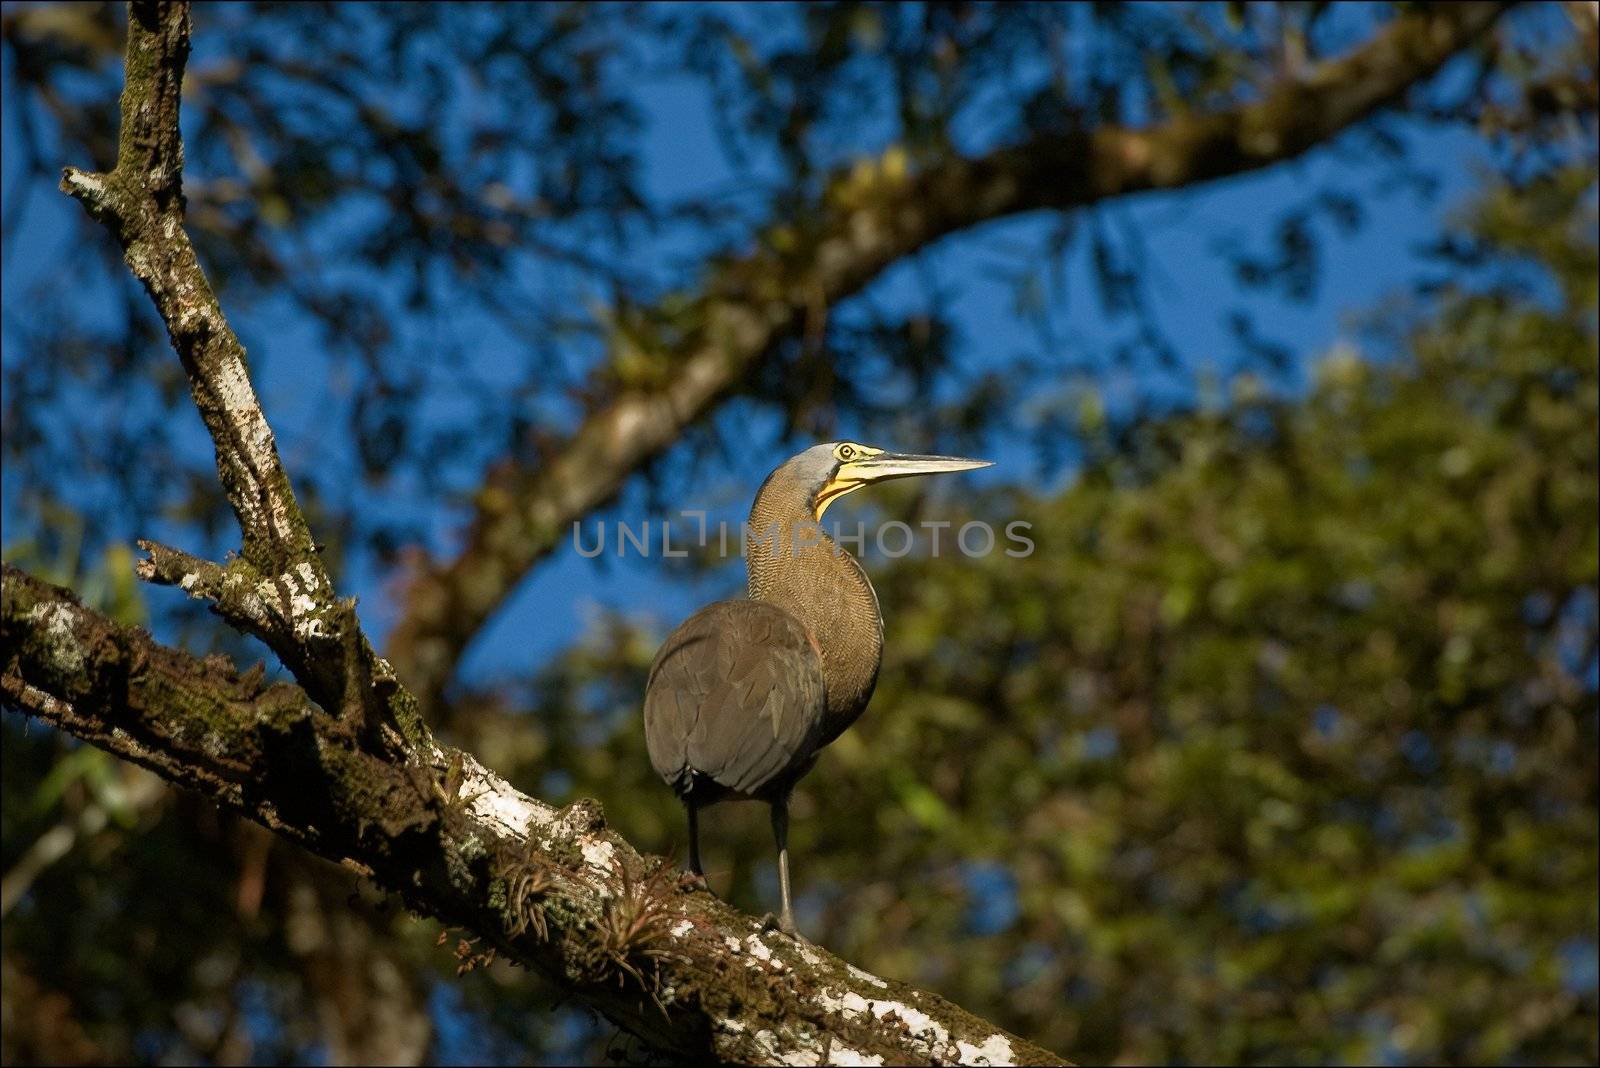 The Bare-throated Tiger Heron. by SURZ